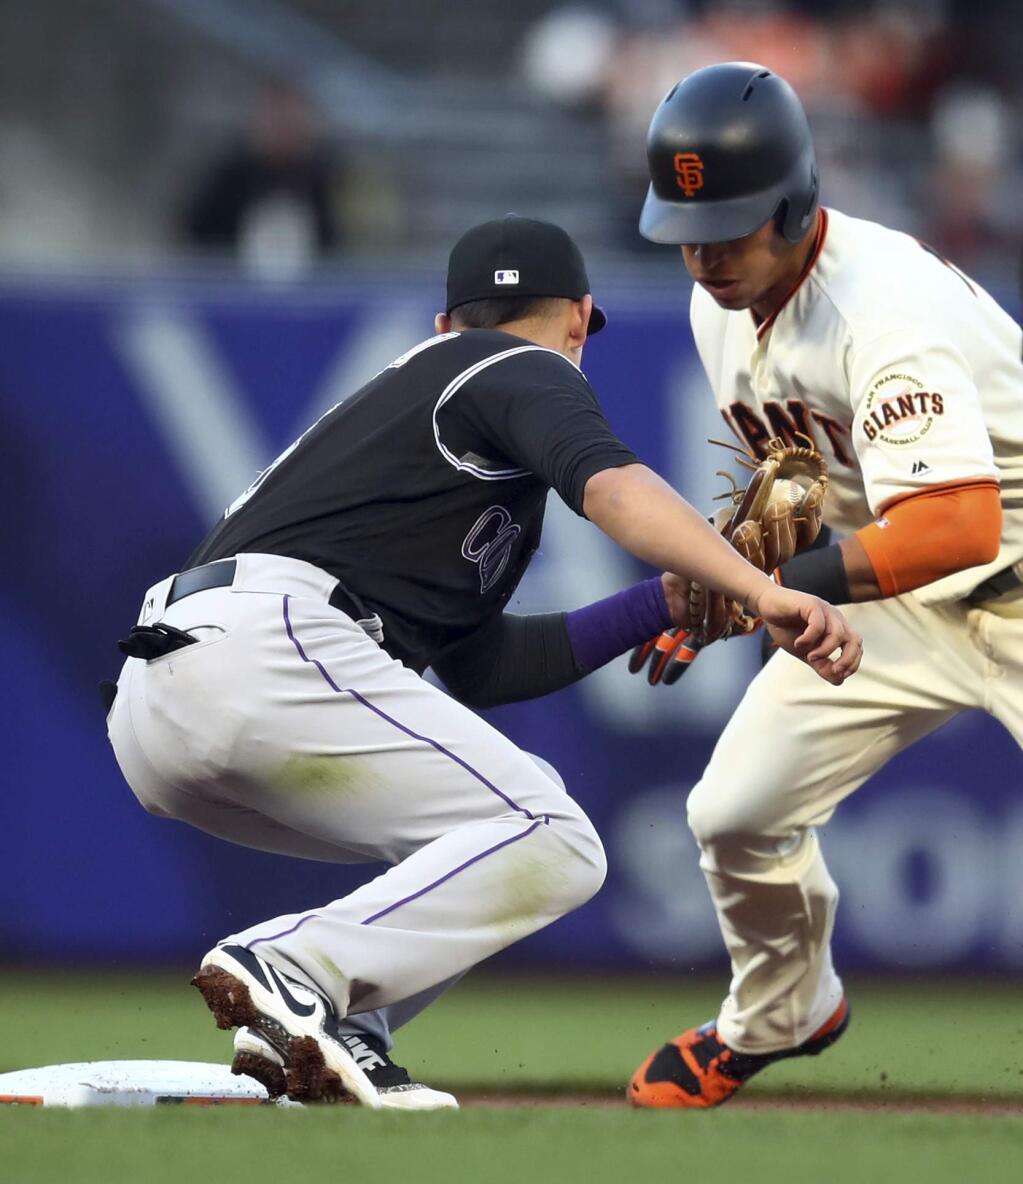 Colorado Rockies' Daniel Castro, left, tags out San Francisco Giants' Gorkys Hernandez on a first-inning attempted steal of second base during a baseball game Thursday, May 17, 2018, in San Francisco. (AP Photo/Ben Margot)